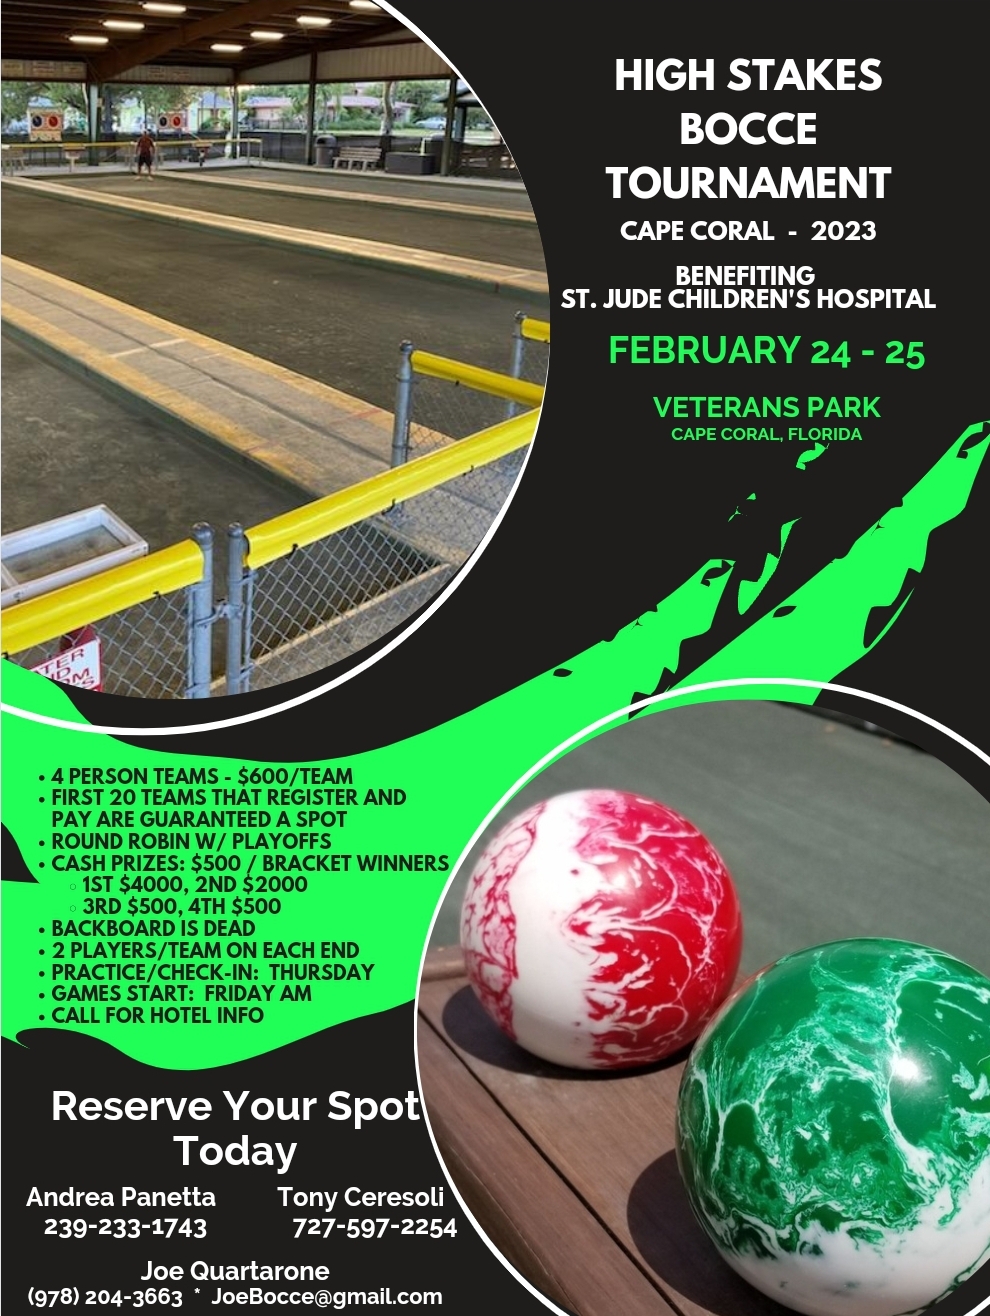 2024 Bocce Tournament in Cape Coral, Florida. It is a fundraiser for St. Jude Children's Hospital. Bocce Ball is a sport that is easy to learn. Women, Men, children, adults and seniors all enjoying playing bocce. We often play bocce to raise money for charities.